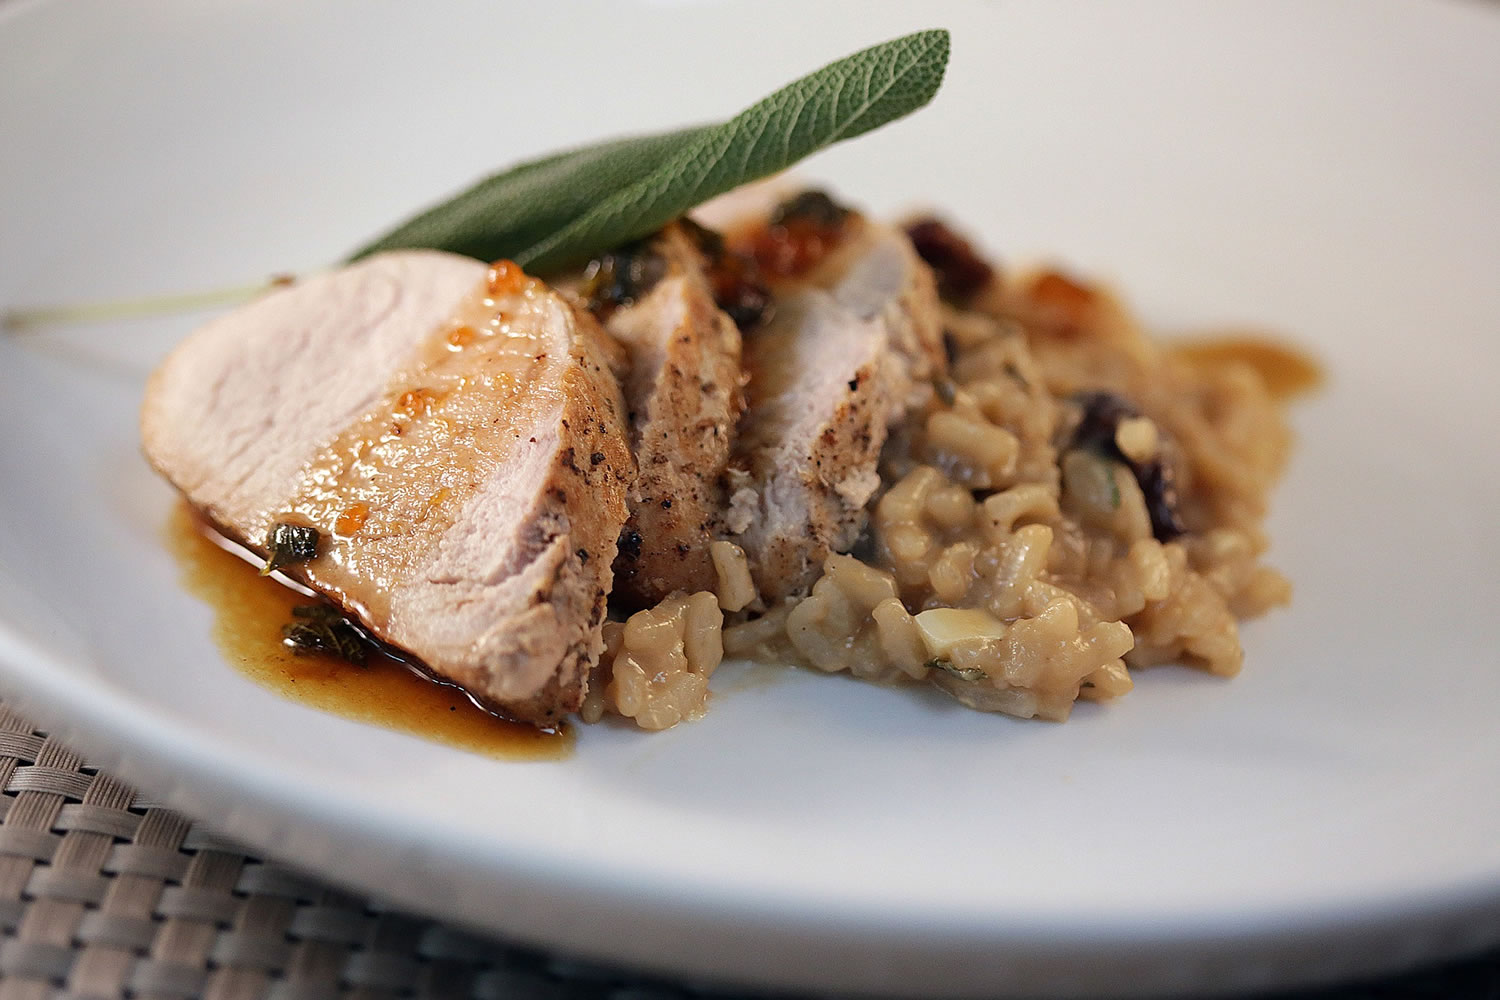 Beer-glazed Pork Tenderloin with Michigan Cherry Risotto makes an elegant fall dinner party meal.